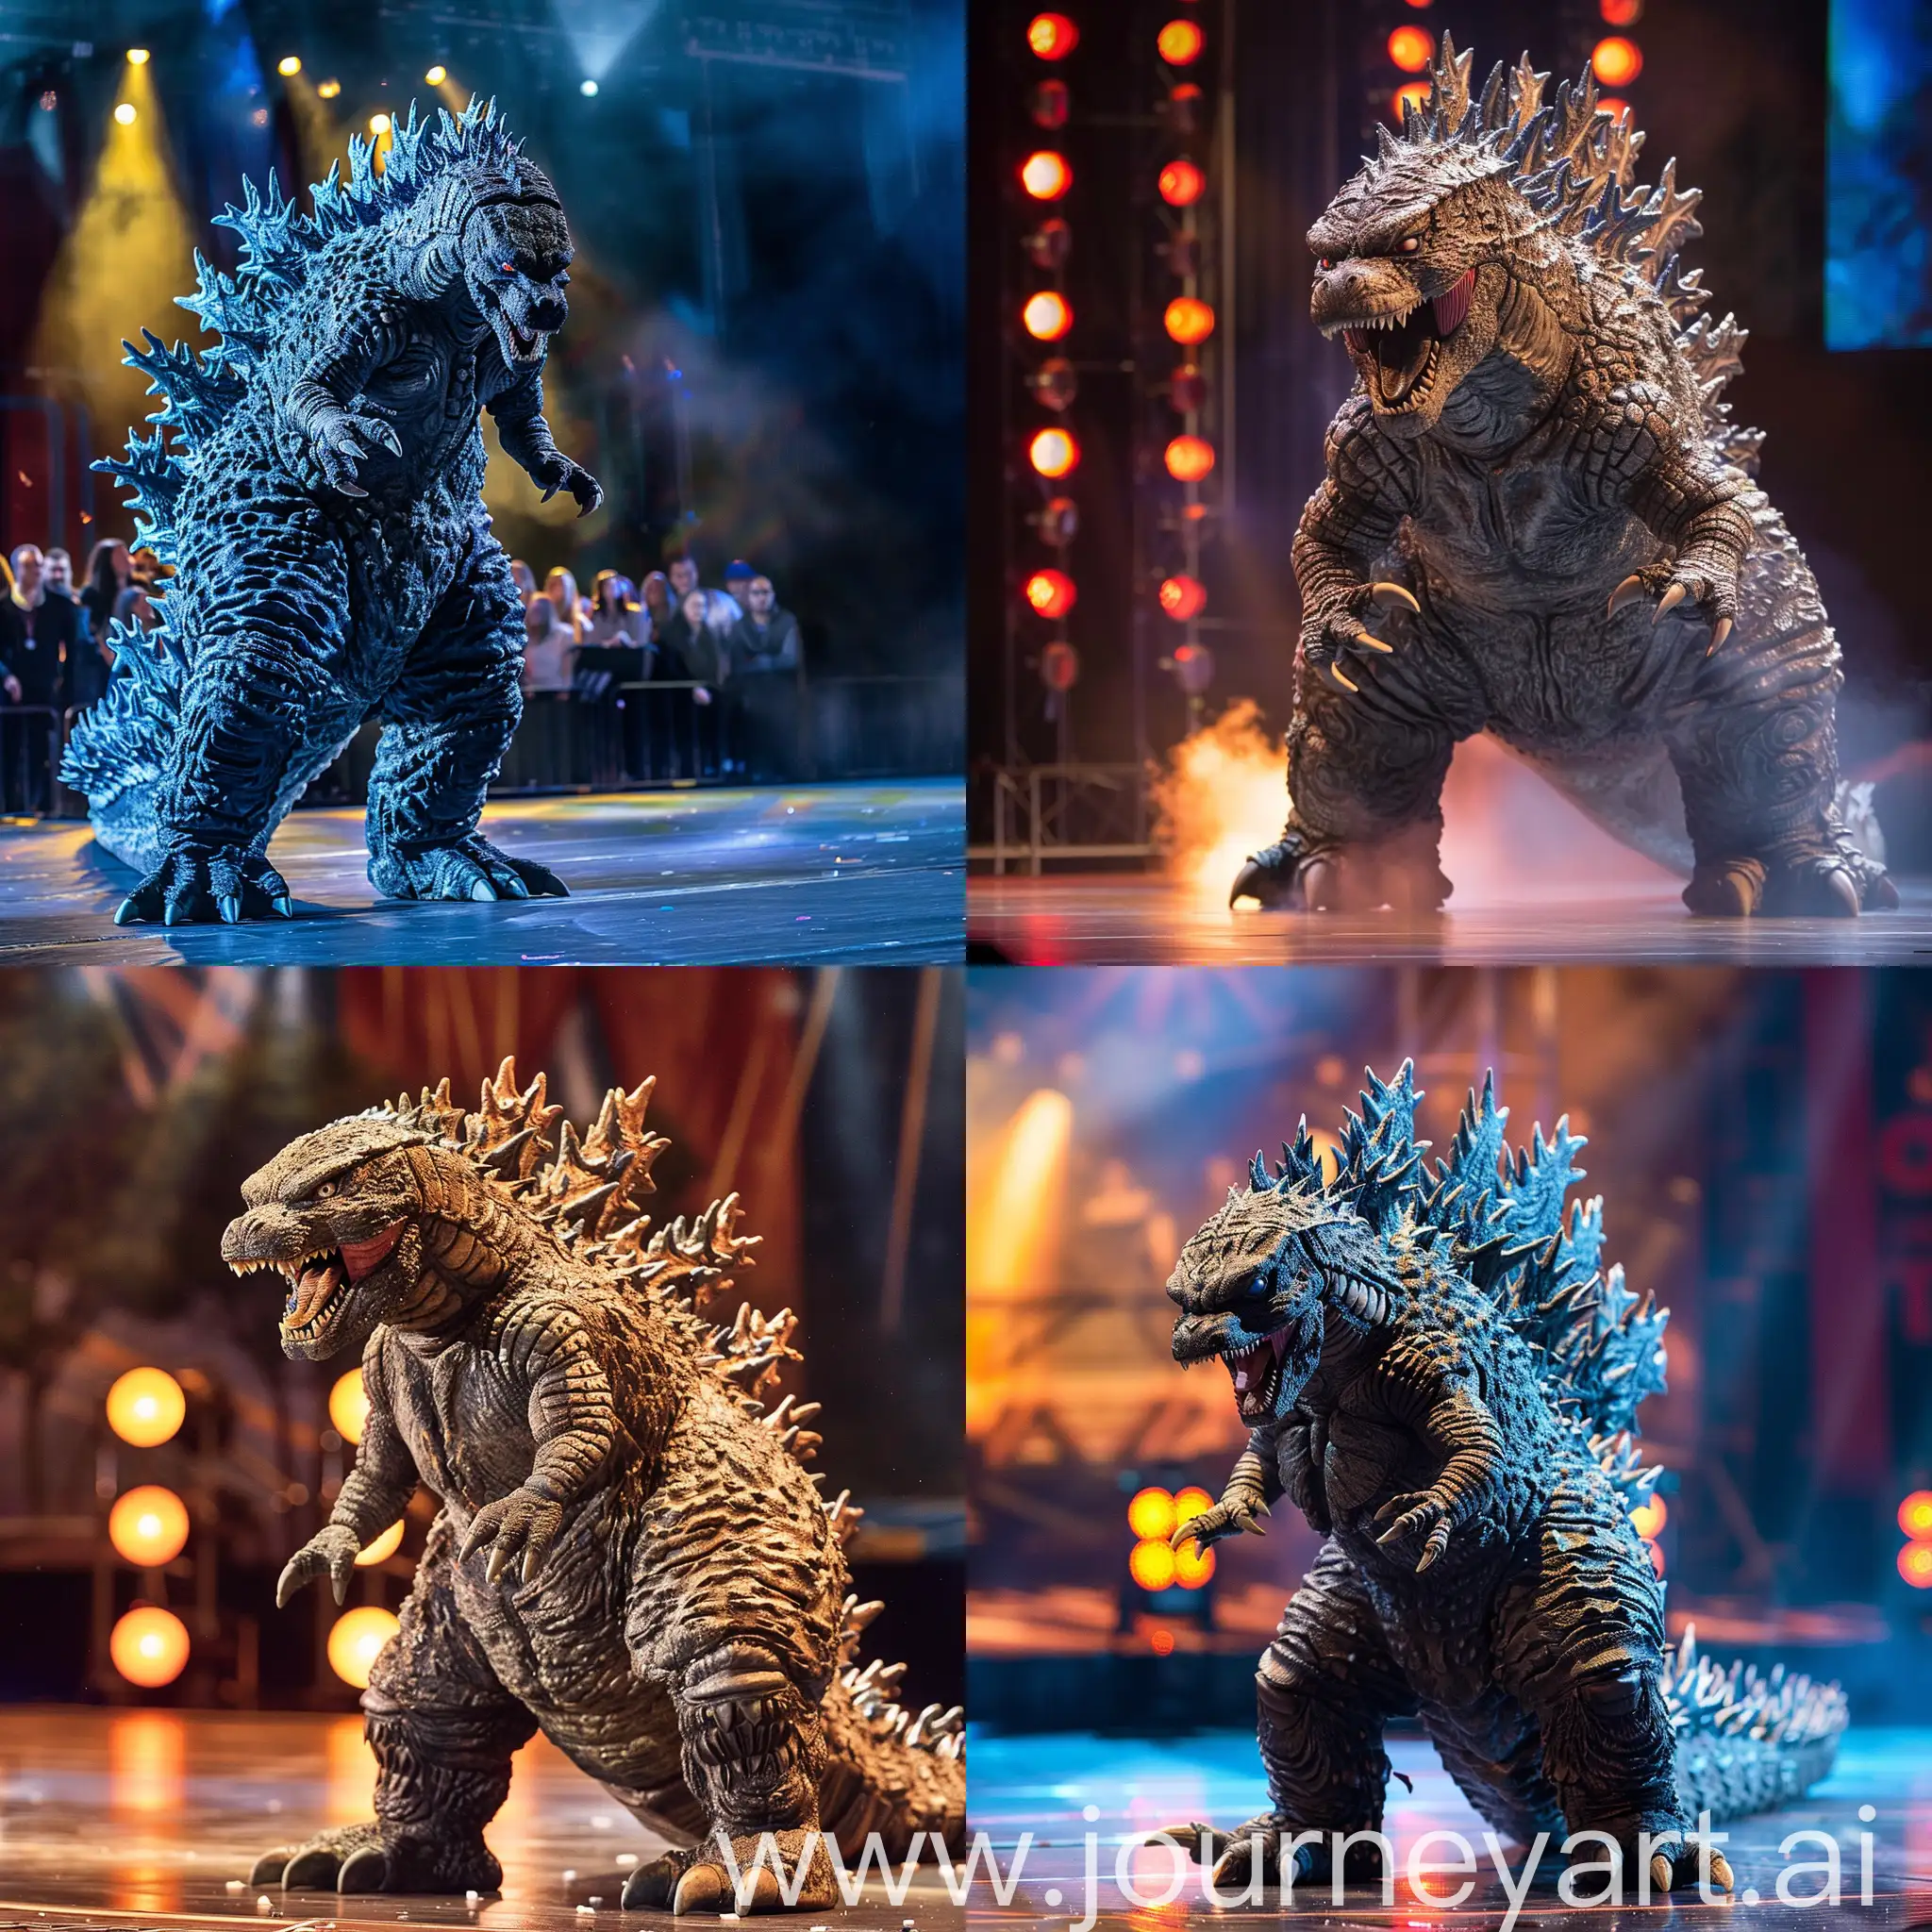 Spectacular-Godzilla-Rampage-Wows-Got-Talent-Arena-Audience